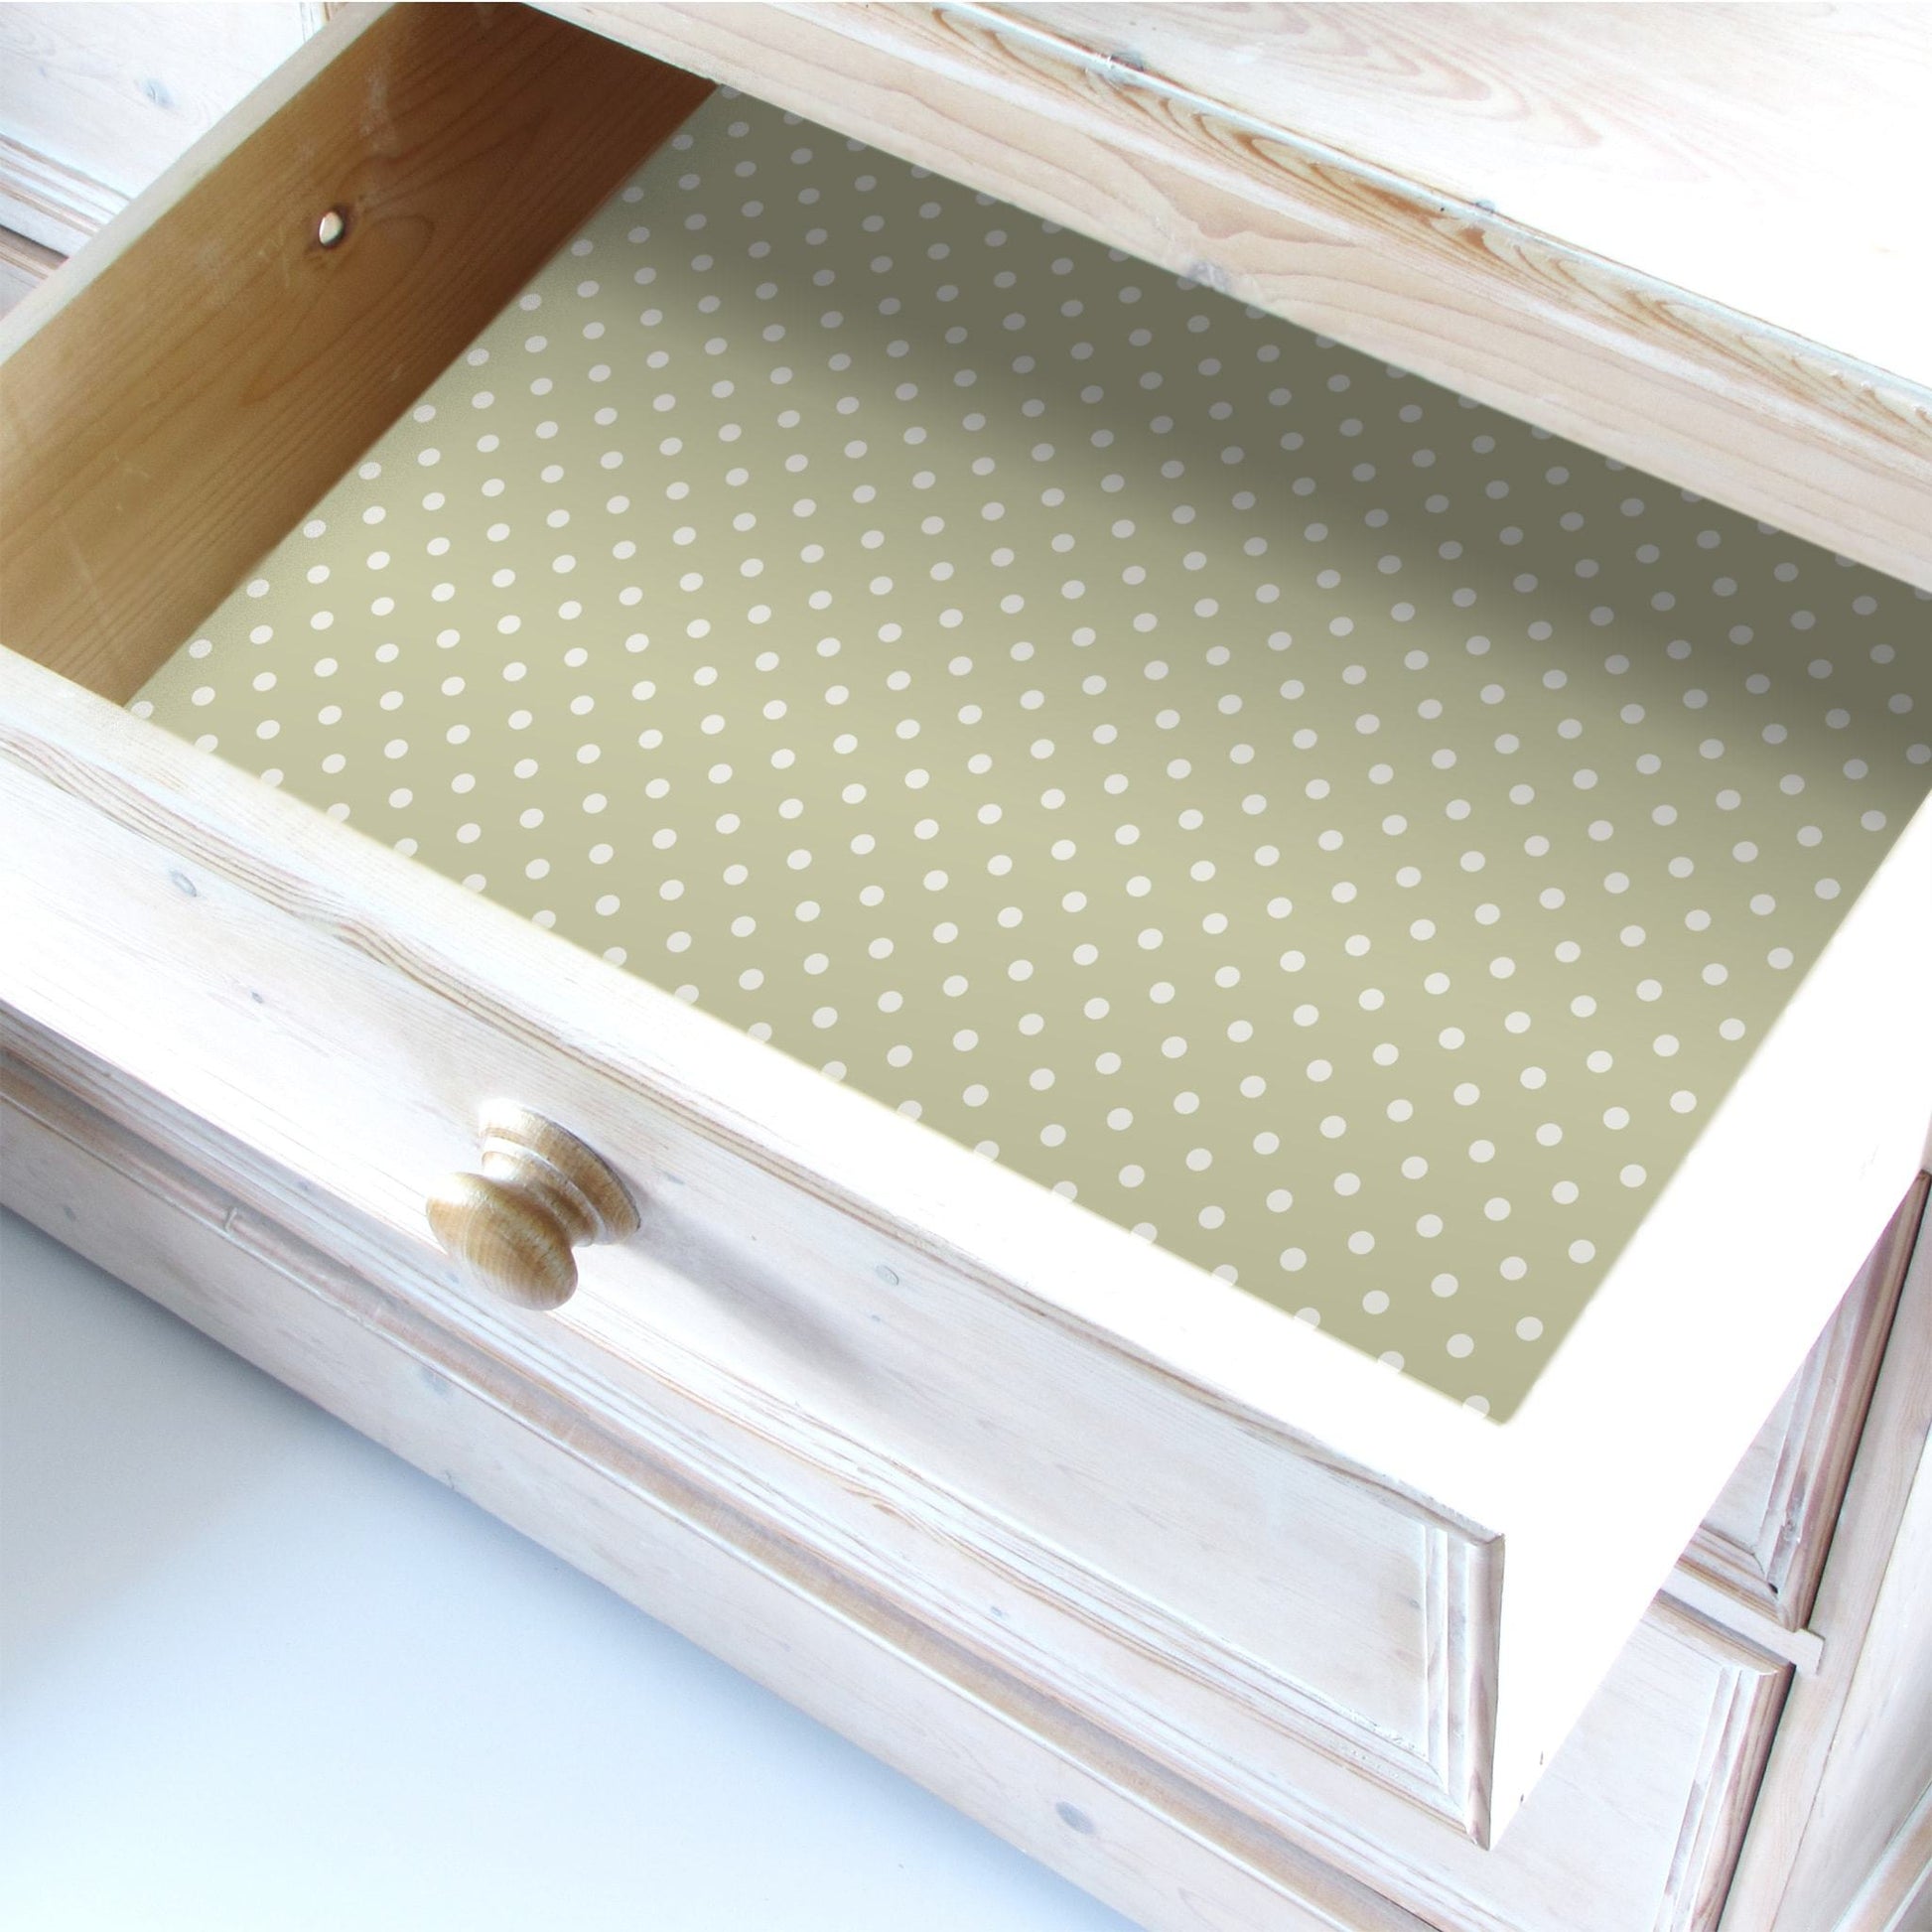 THE MASTER HERBALIST | Wipe Clean & Unscented Drawer Liners in a SAGE GREEN POLKA DOT Design. Perfect for Kitchen Drawers, Shelves, Cupboards & Cabinets. Made in Suffolk, England. (Sage Green)